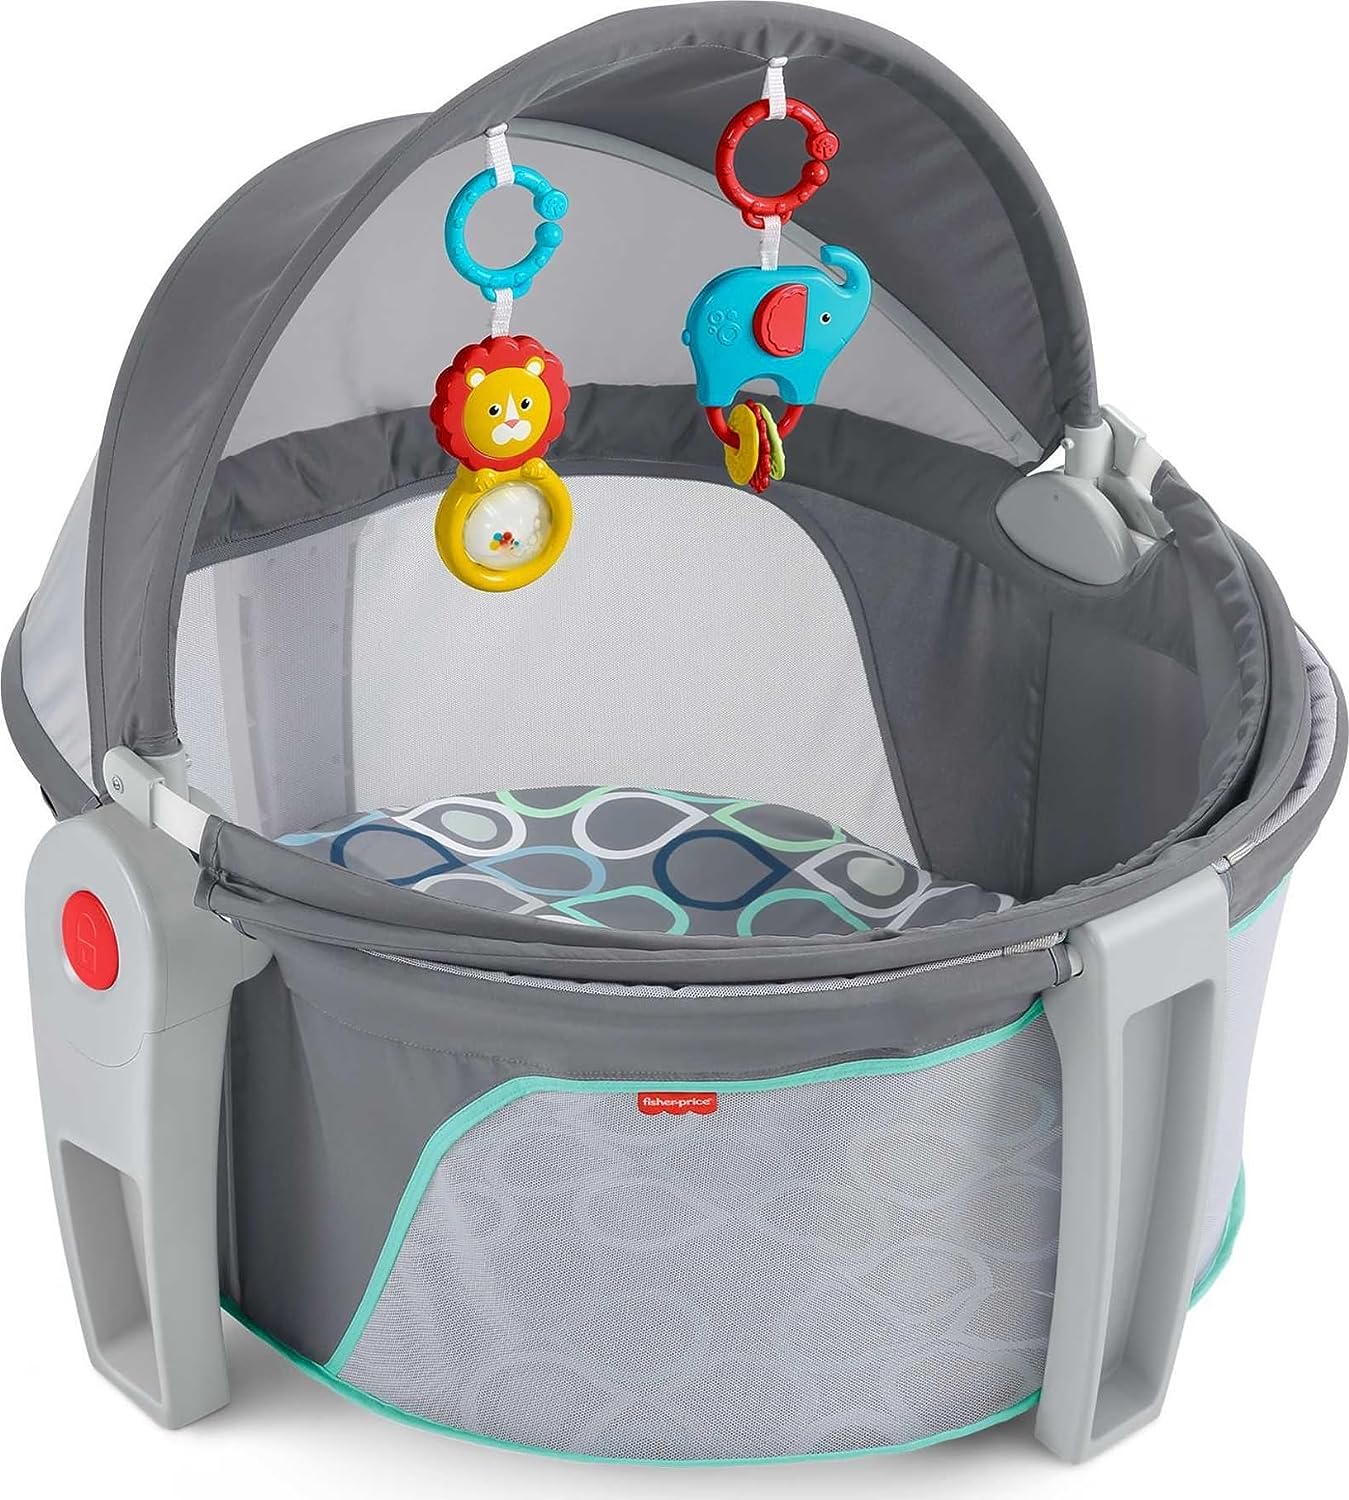 DP On-the-Go Baby Dome, Grey